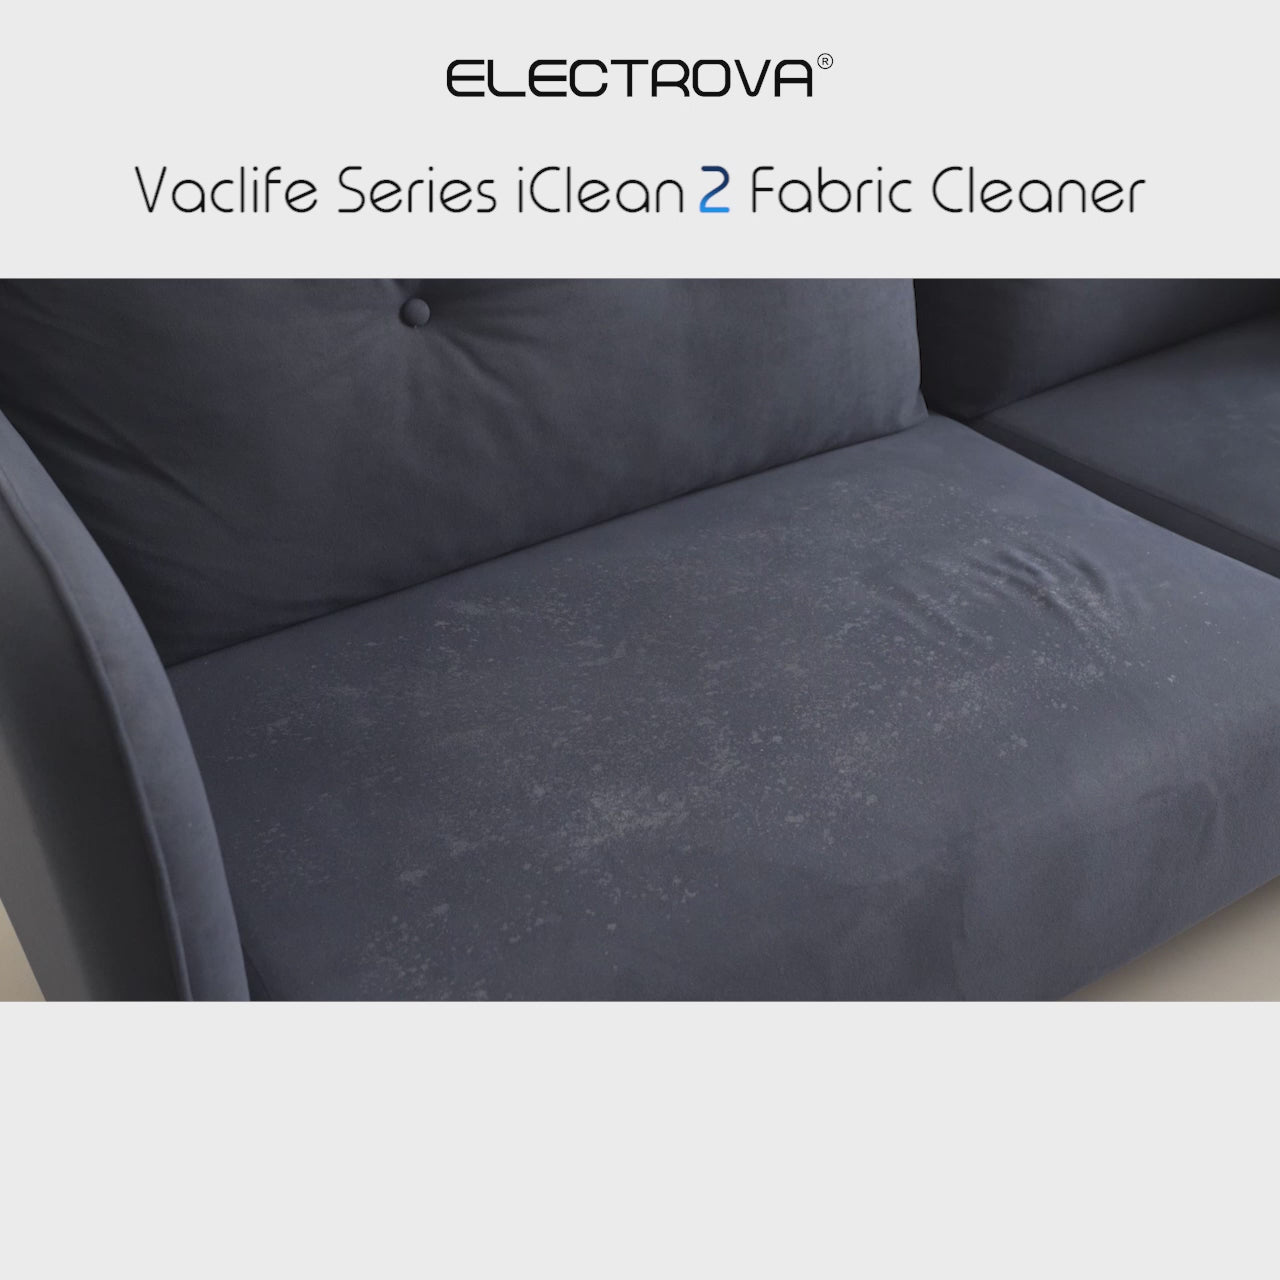 Electrova Vaclife Series Fabric & Upholstery Cleaner iClean 2